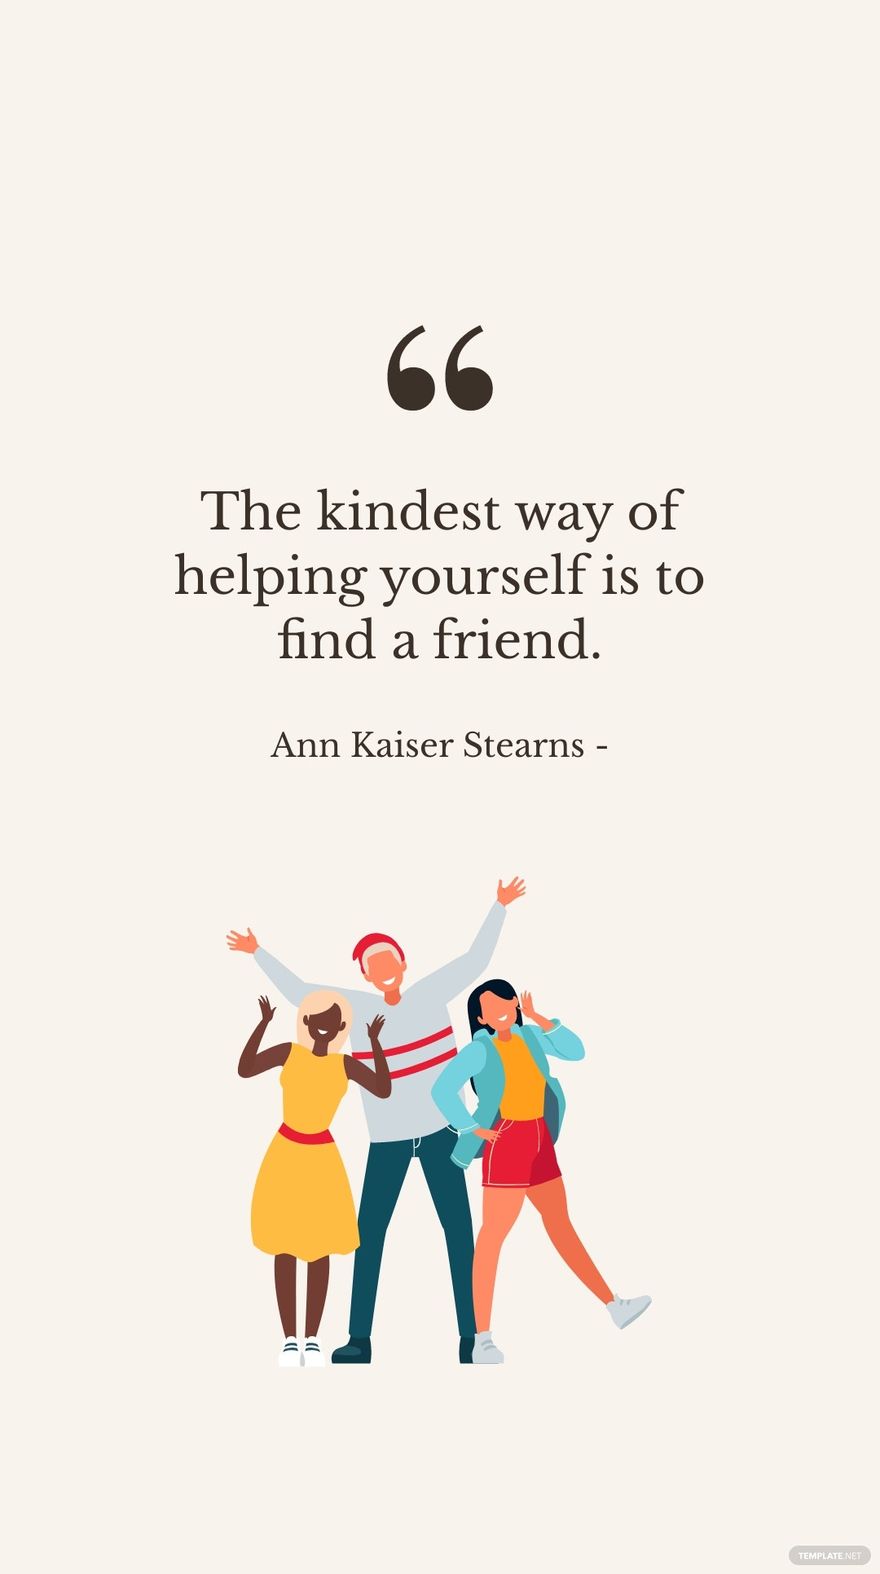 Ann Kaiser Stearns - The kindest way of helping yourself is to find a friend.